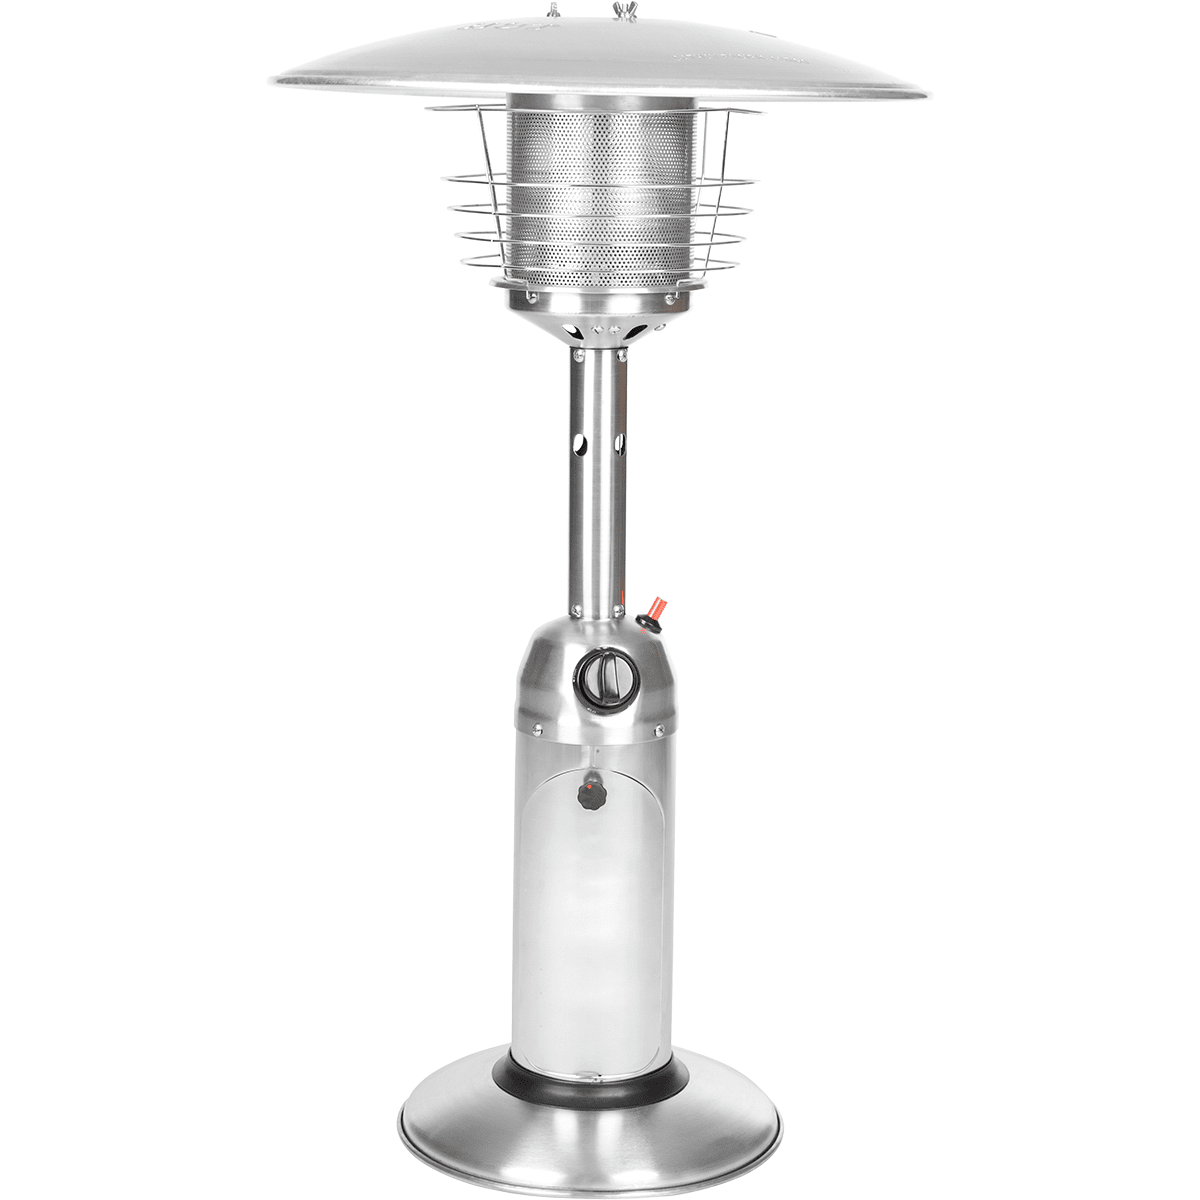 Fire Sense Table Top Patio Heater Stainless Steel Finish